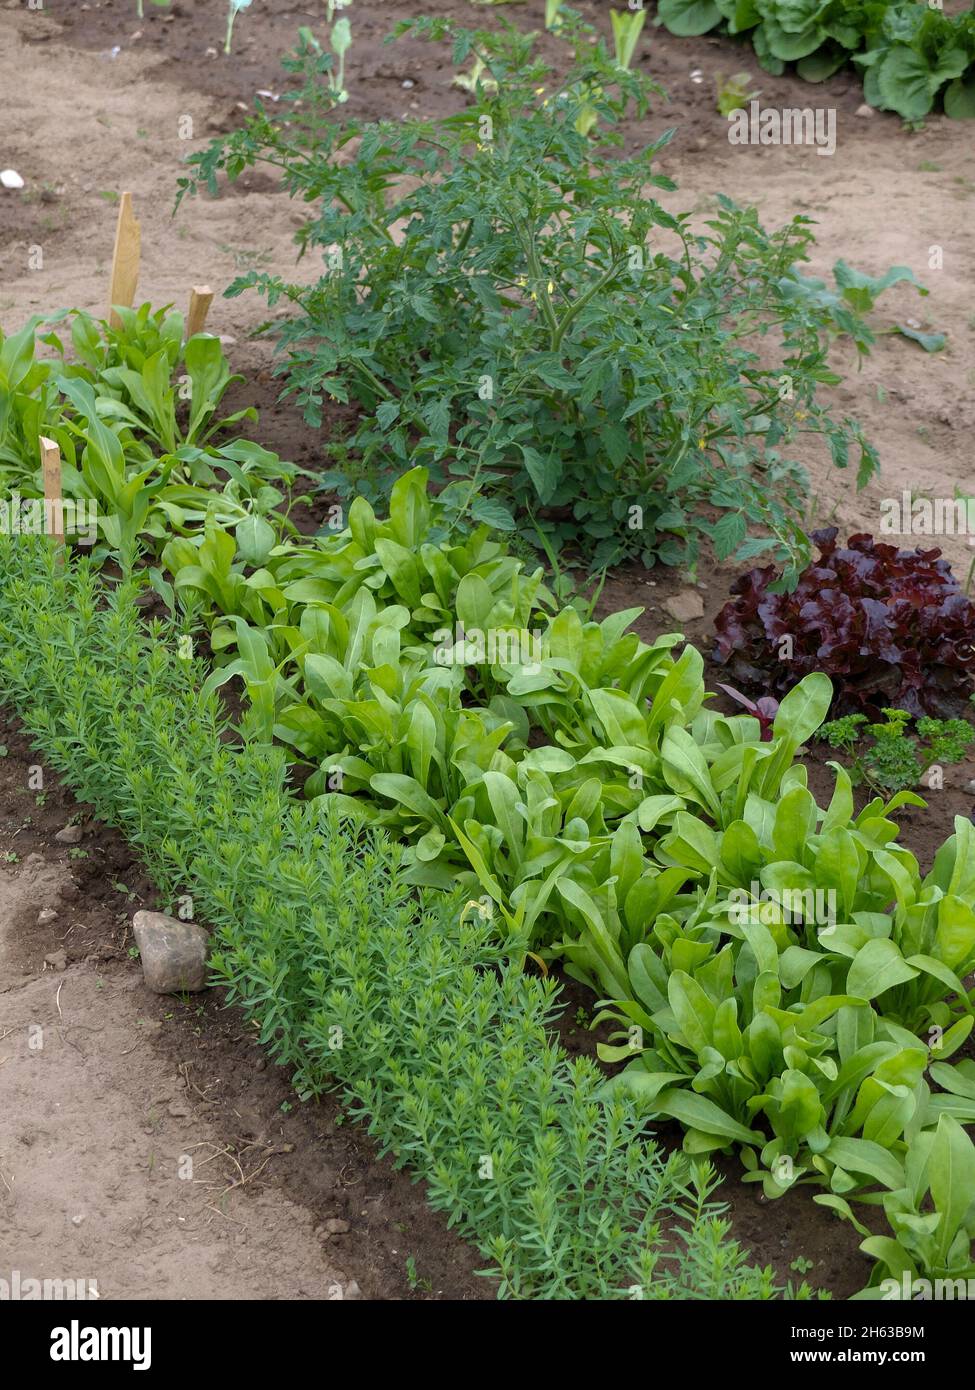 vegetable patch in spring: tomato (solanum lycopersicum),lettuce (lactuca sativa) and calendula,young plants Stock Photo